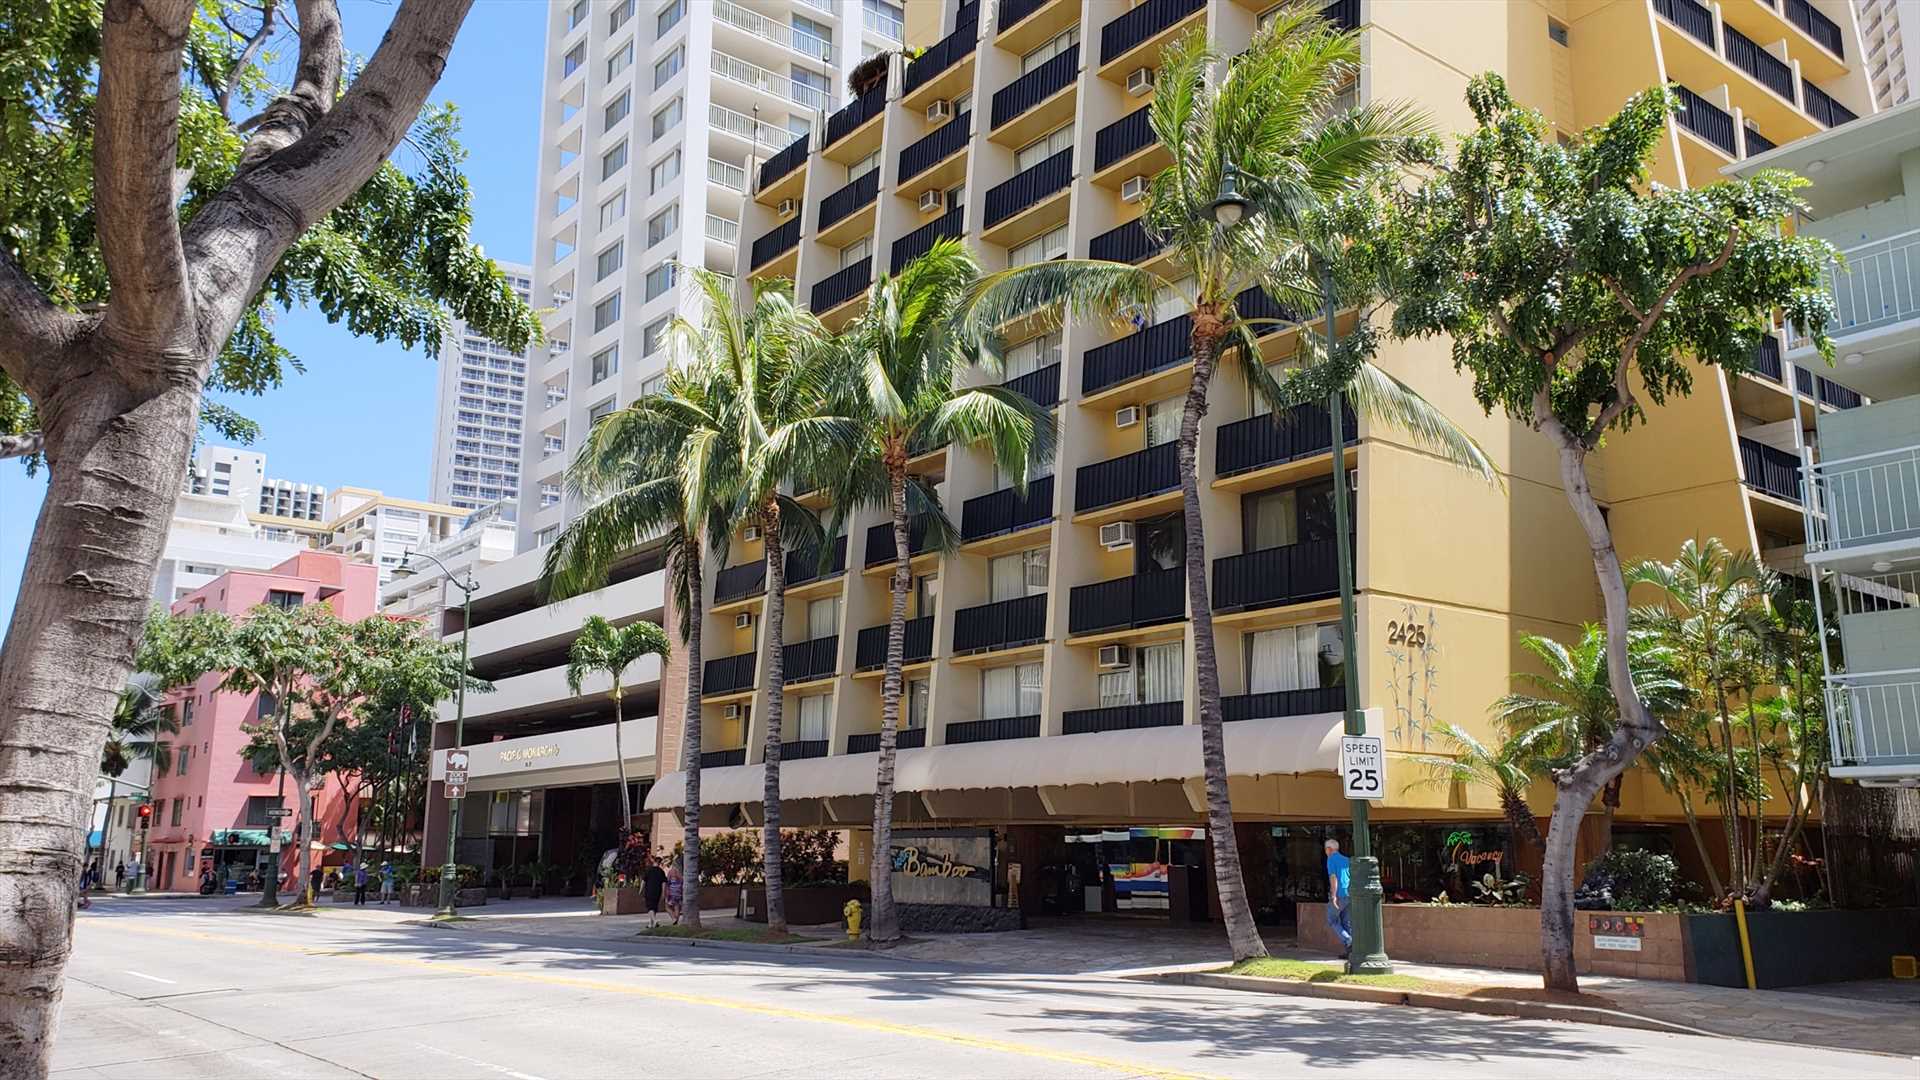 The Bamboo is located in the center of Waikiki on Kuhio Ave.